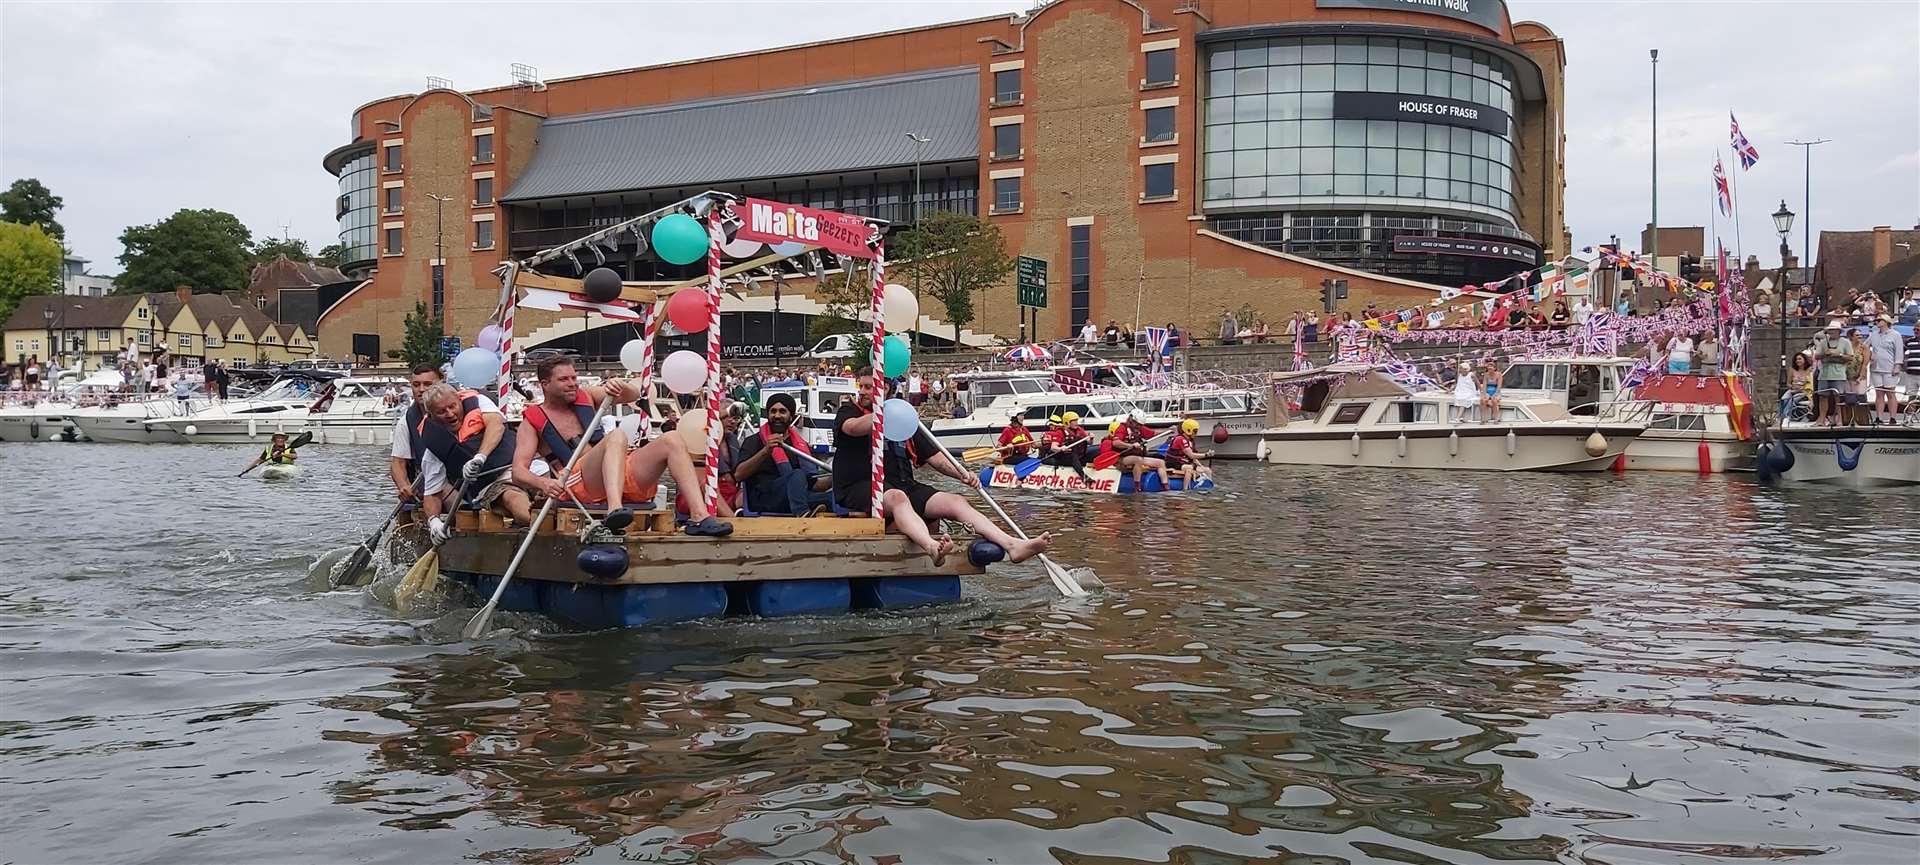 Fun from a previous river race